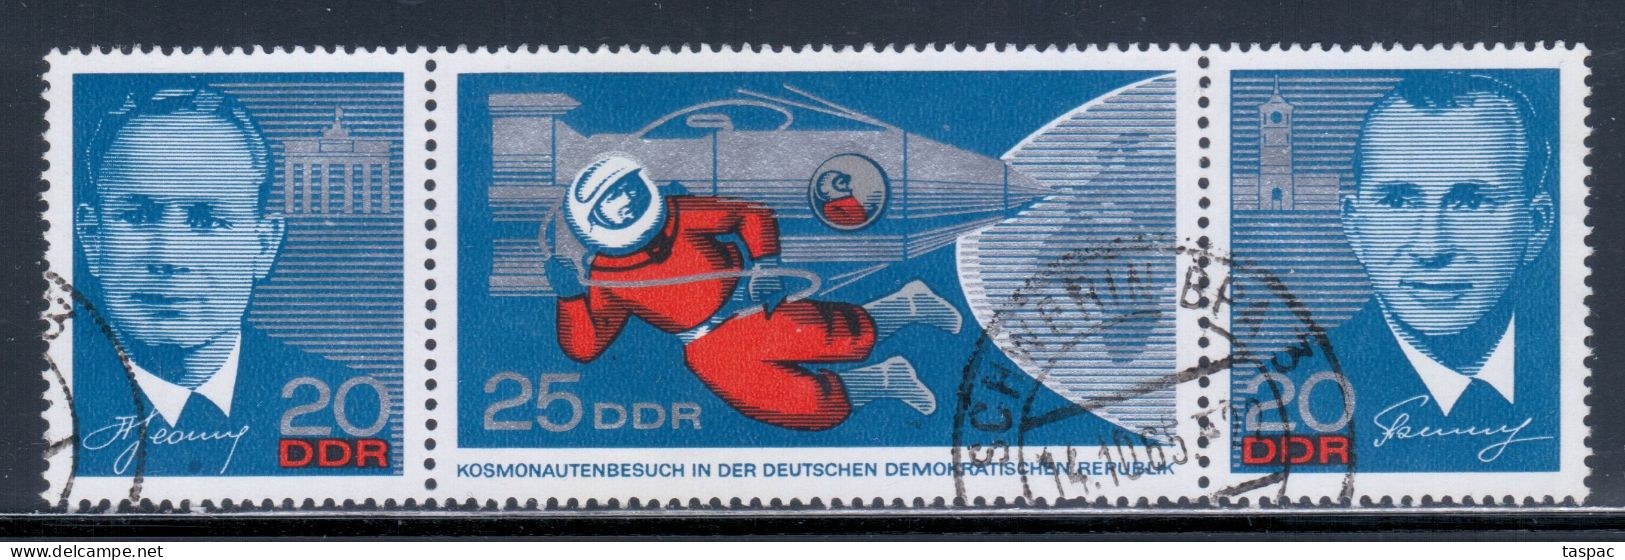 East Germany / DDR 1965 Mi# 1138-1140 Used - Strip Of 3 - Visit Of The Russian Cosmonauts / Space - Europa